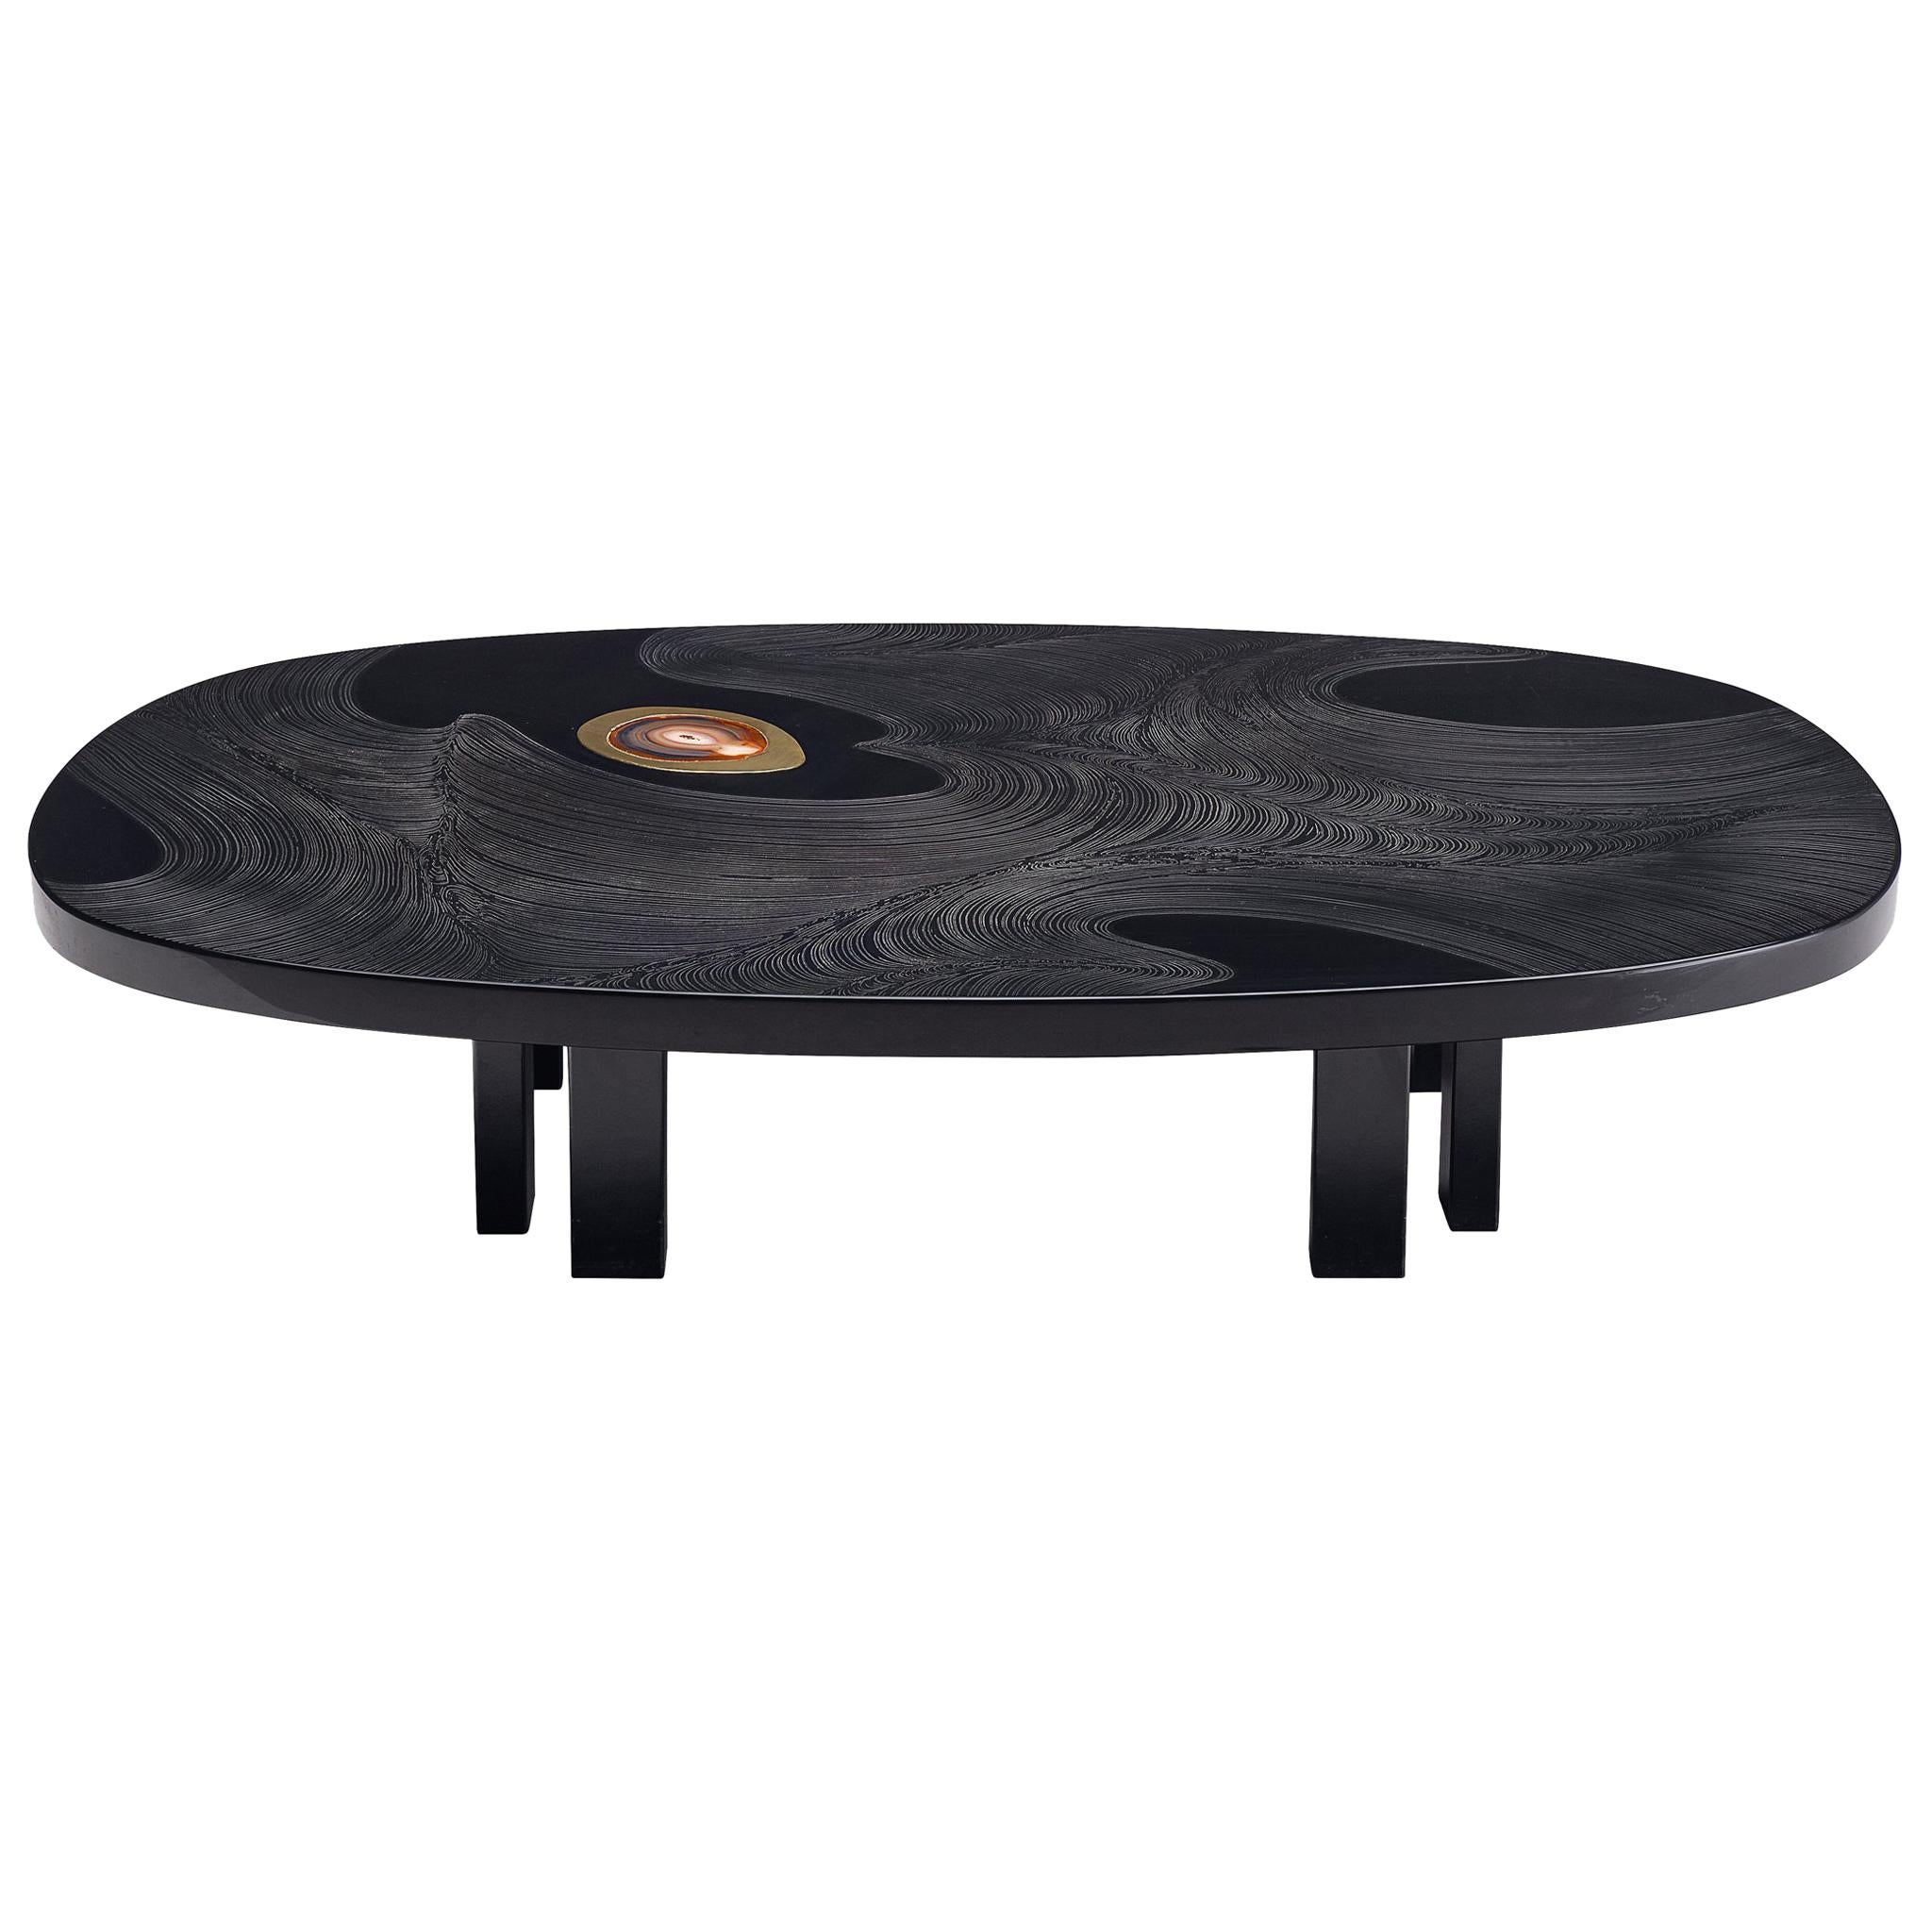 Jean Claude Dresse Luxurious Coffee Table in Black Resin Inlaid with Agate